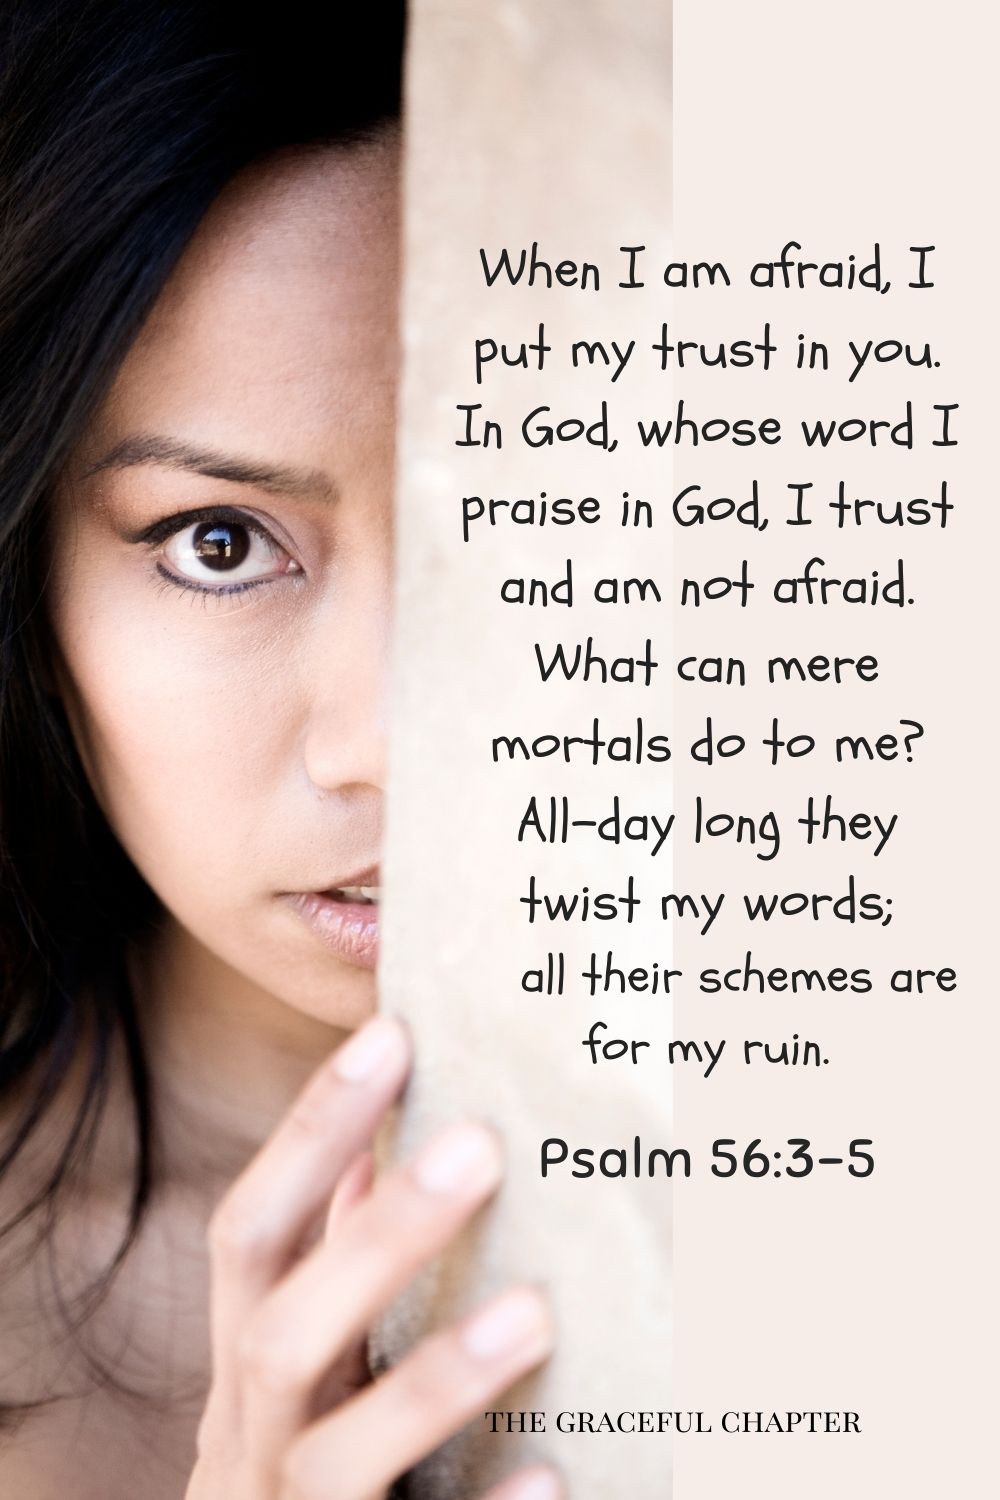 comforting bedtime bible verses- When I am afraid, I put my trust in you. In God, whose word I praise, in God, I trust and am not afraid. What can mere mortals do to me? All-day long they twist my words; all their schemes are for my ruin. Psalm 56:3-5